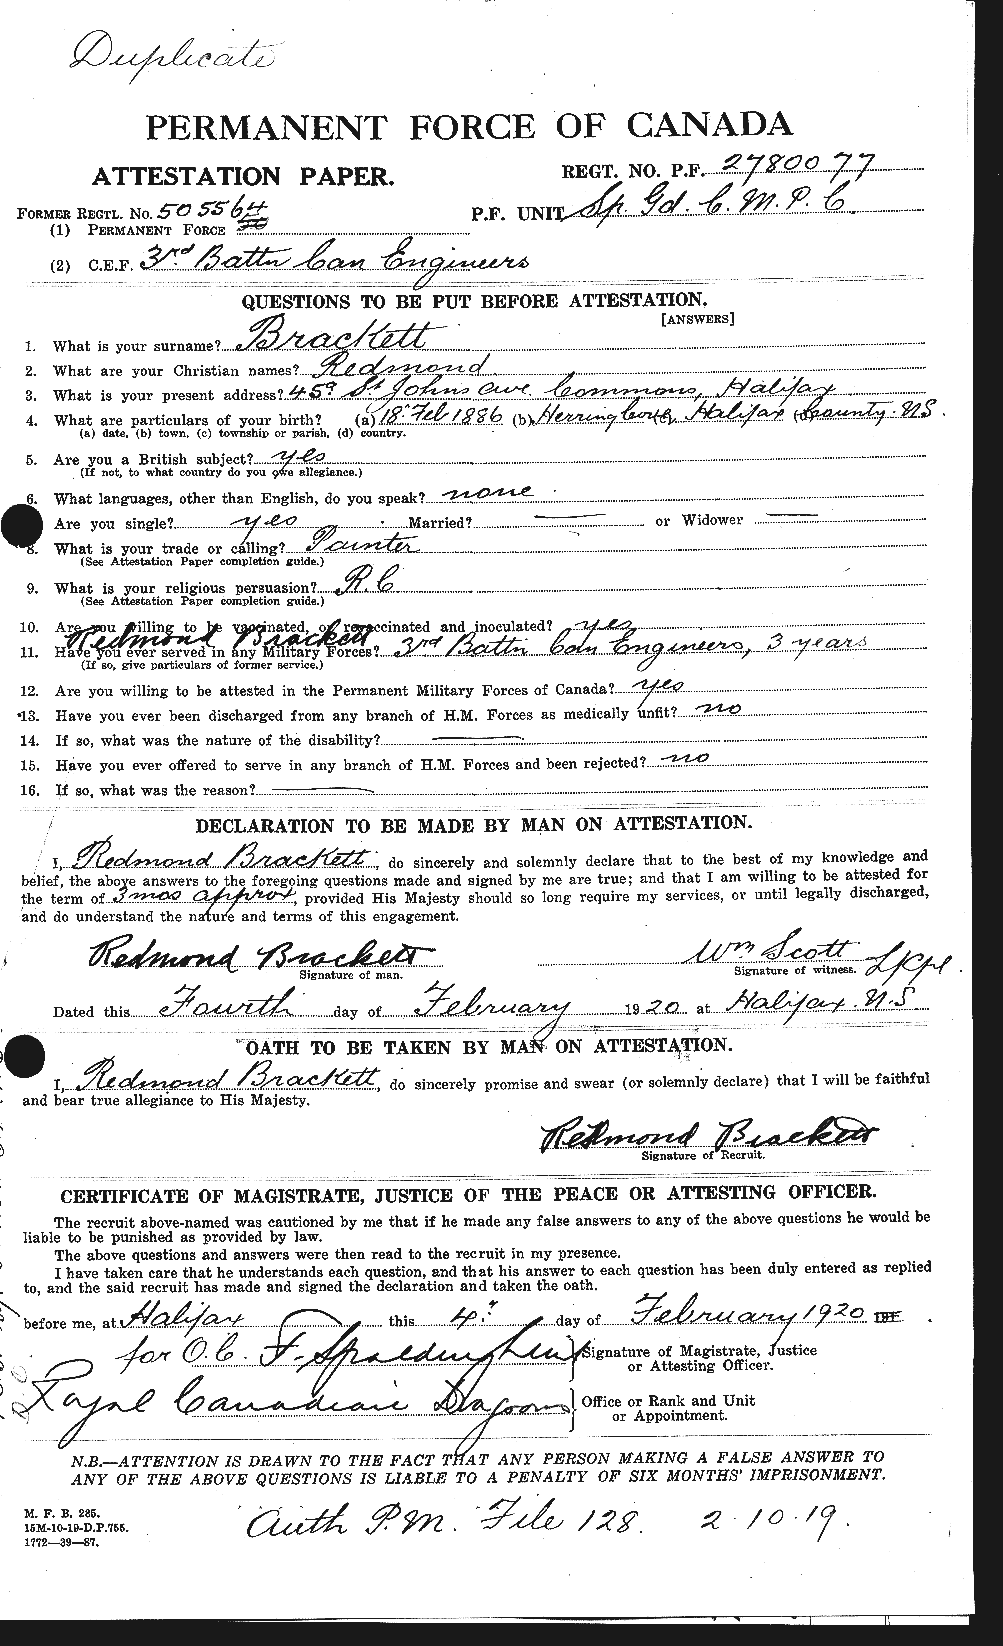 Personnel Records of the First World War - CEF 254740a